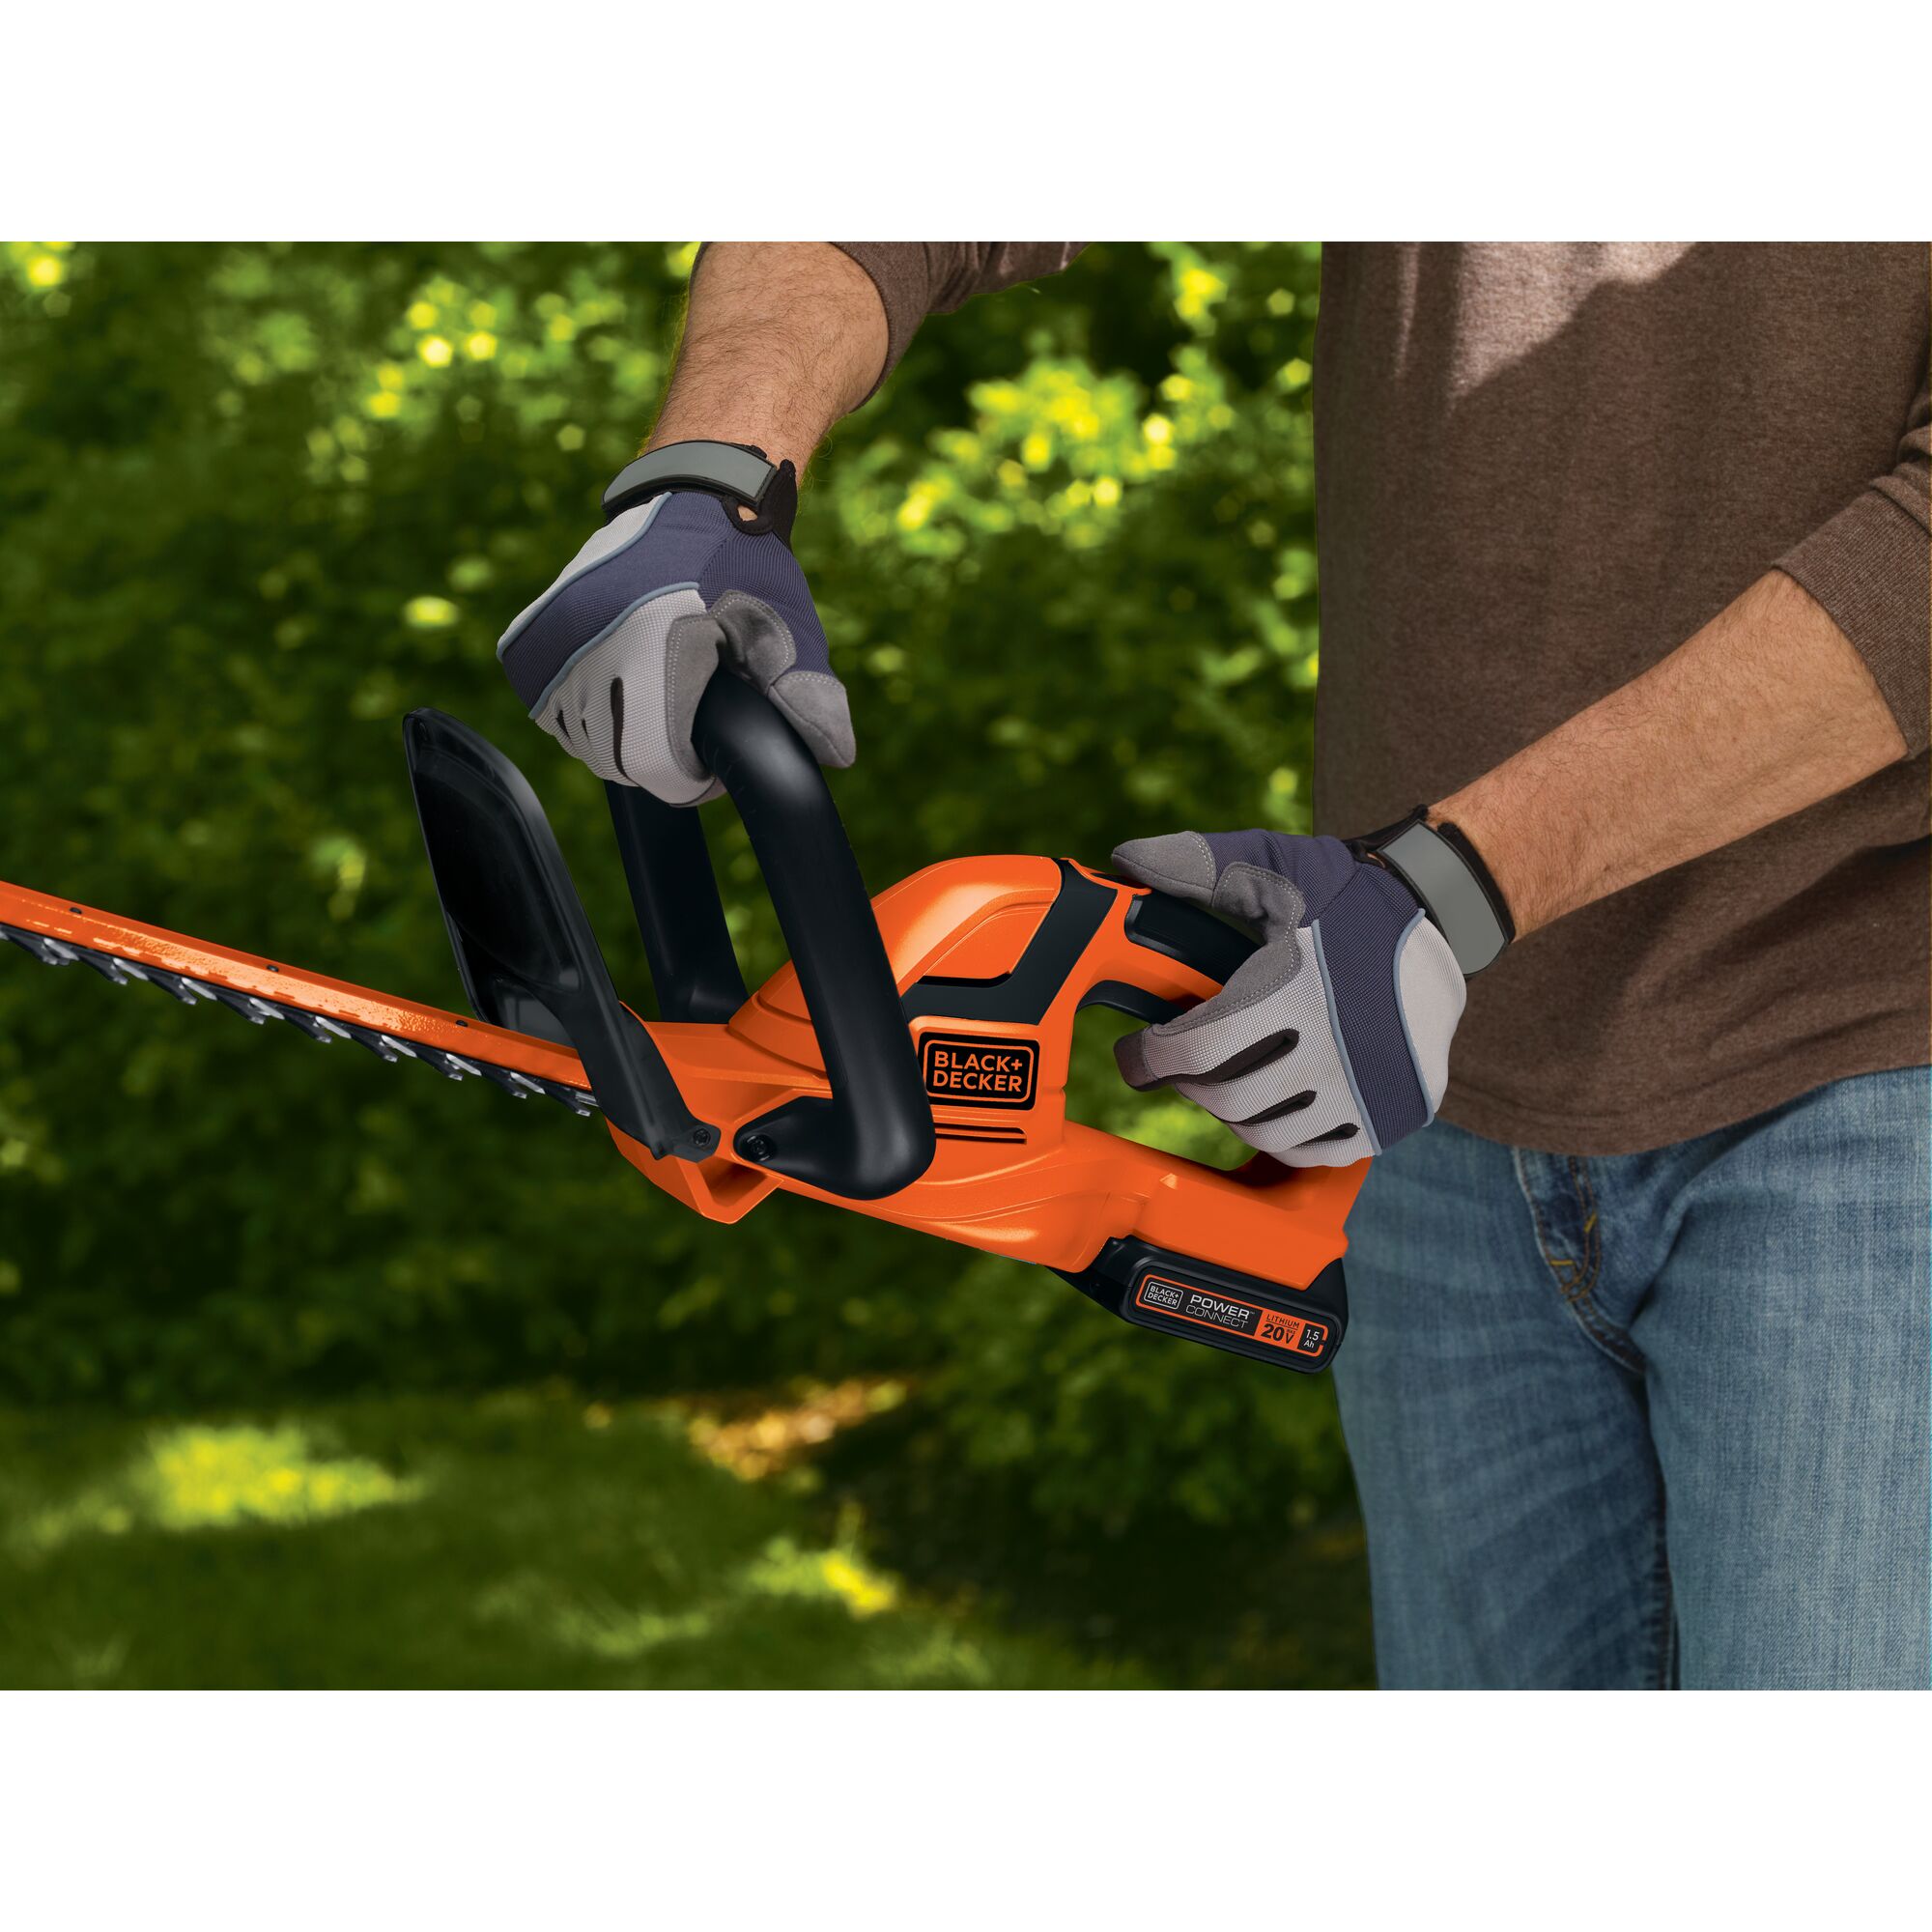 Wrap around front handle feature of 20 volt MAX 22 inch hedge trimmer.